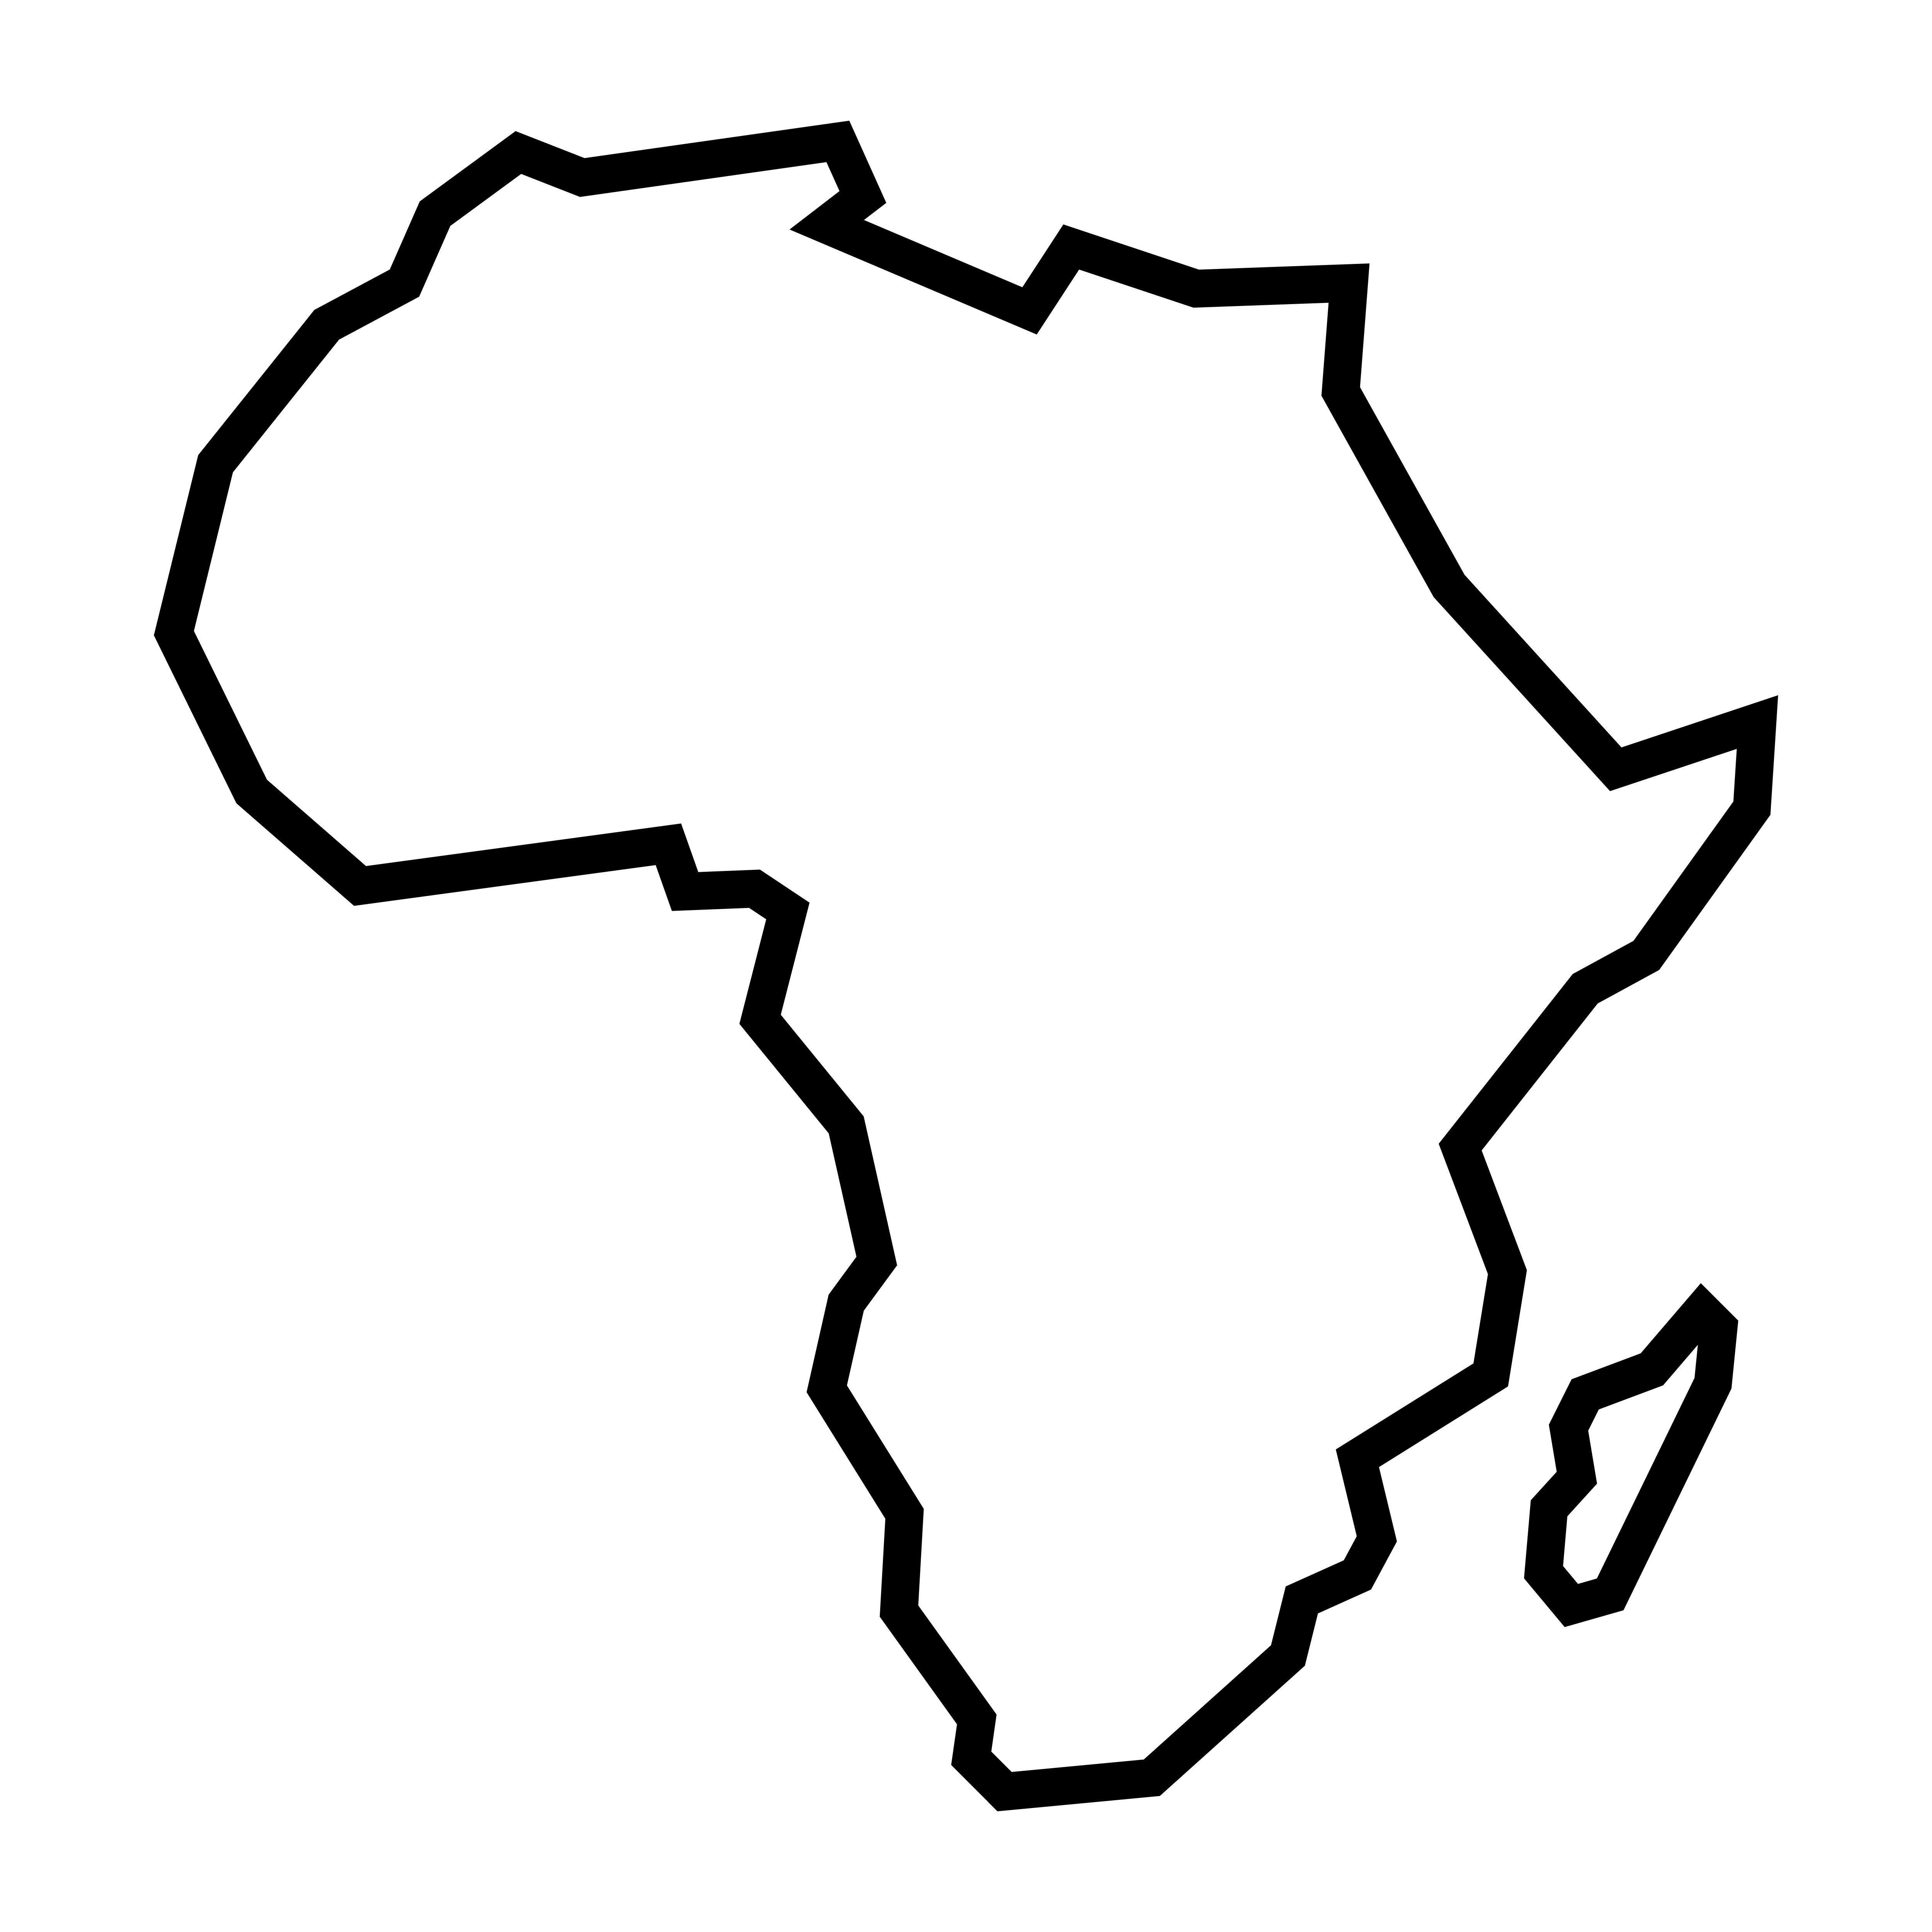 Africa Continent Outline Free Vector Art